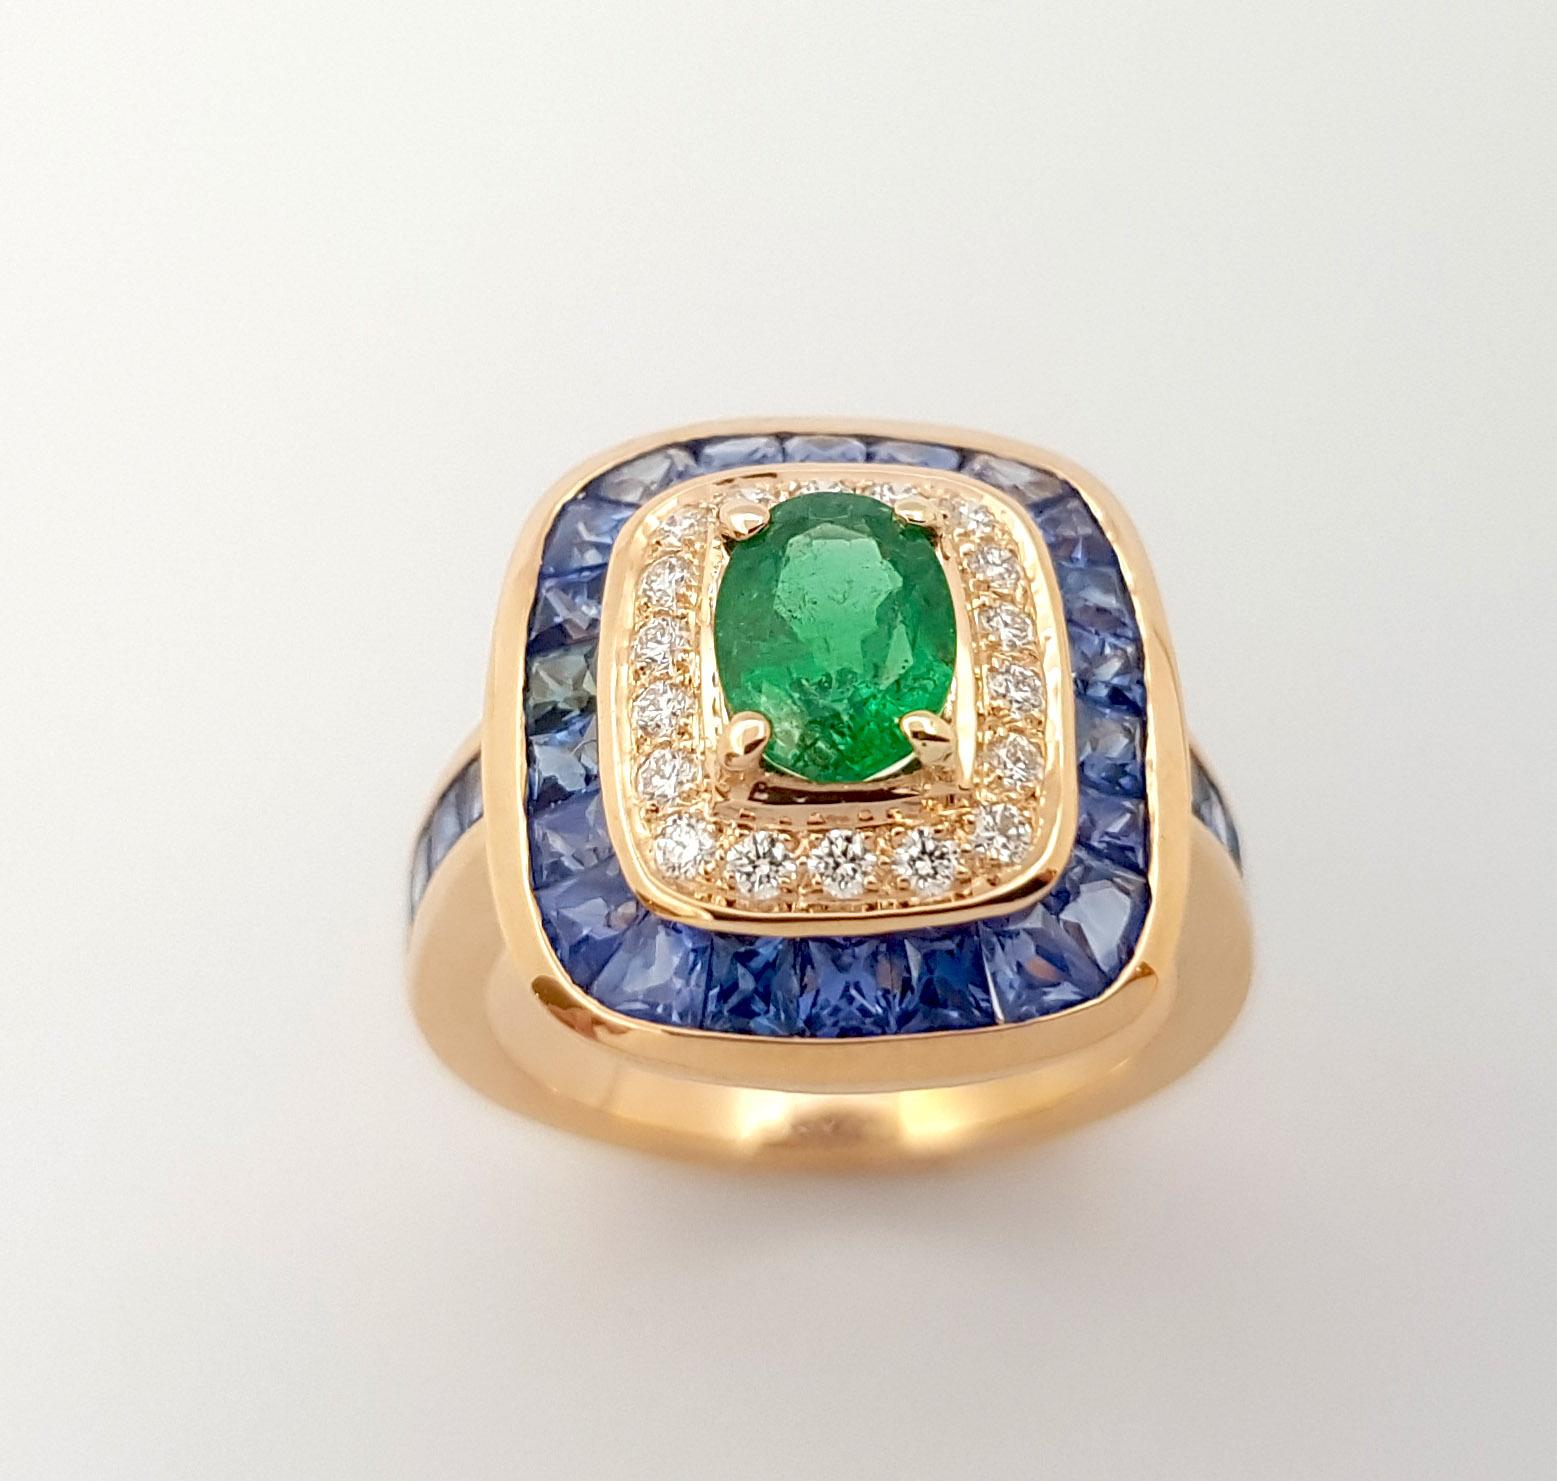 Emerald 0.93 carat, Blue Sapphire 3.78 carat and Diamond 0.21 carat Ring set in 18K Rose Gold Settings

Width:  1.4 cm 
Length: 1.6 cm
Ring Size: 53
Total Weight: 8.50 grams

